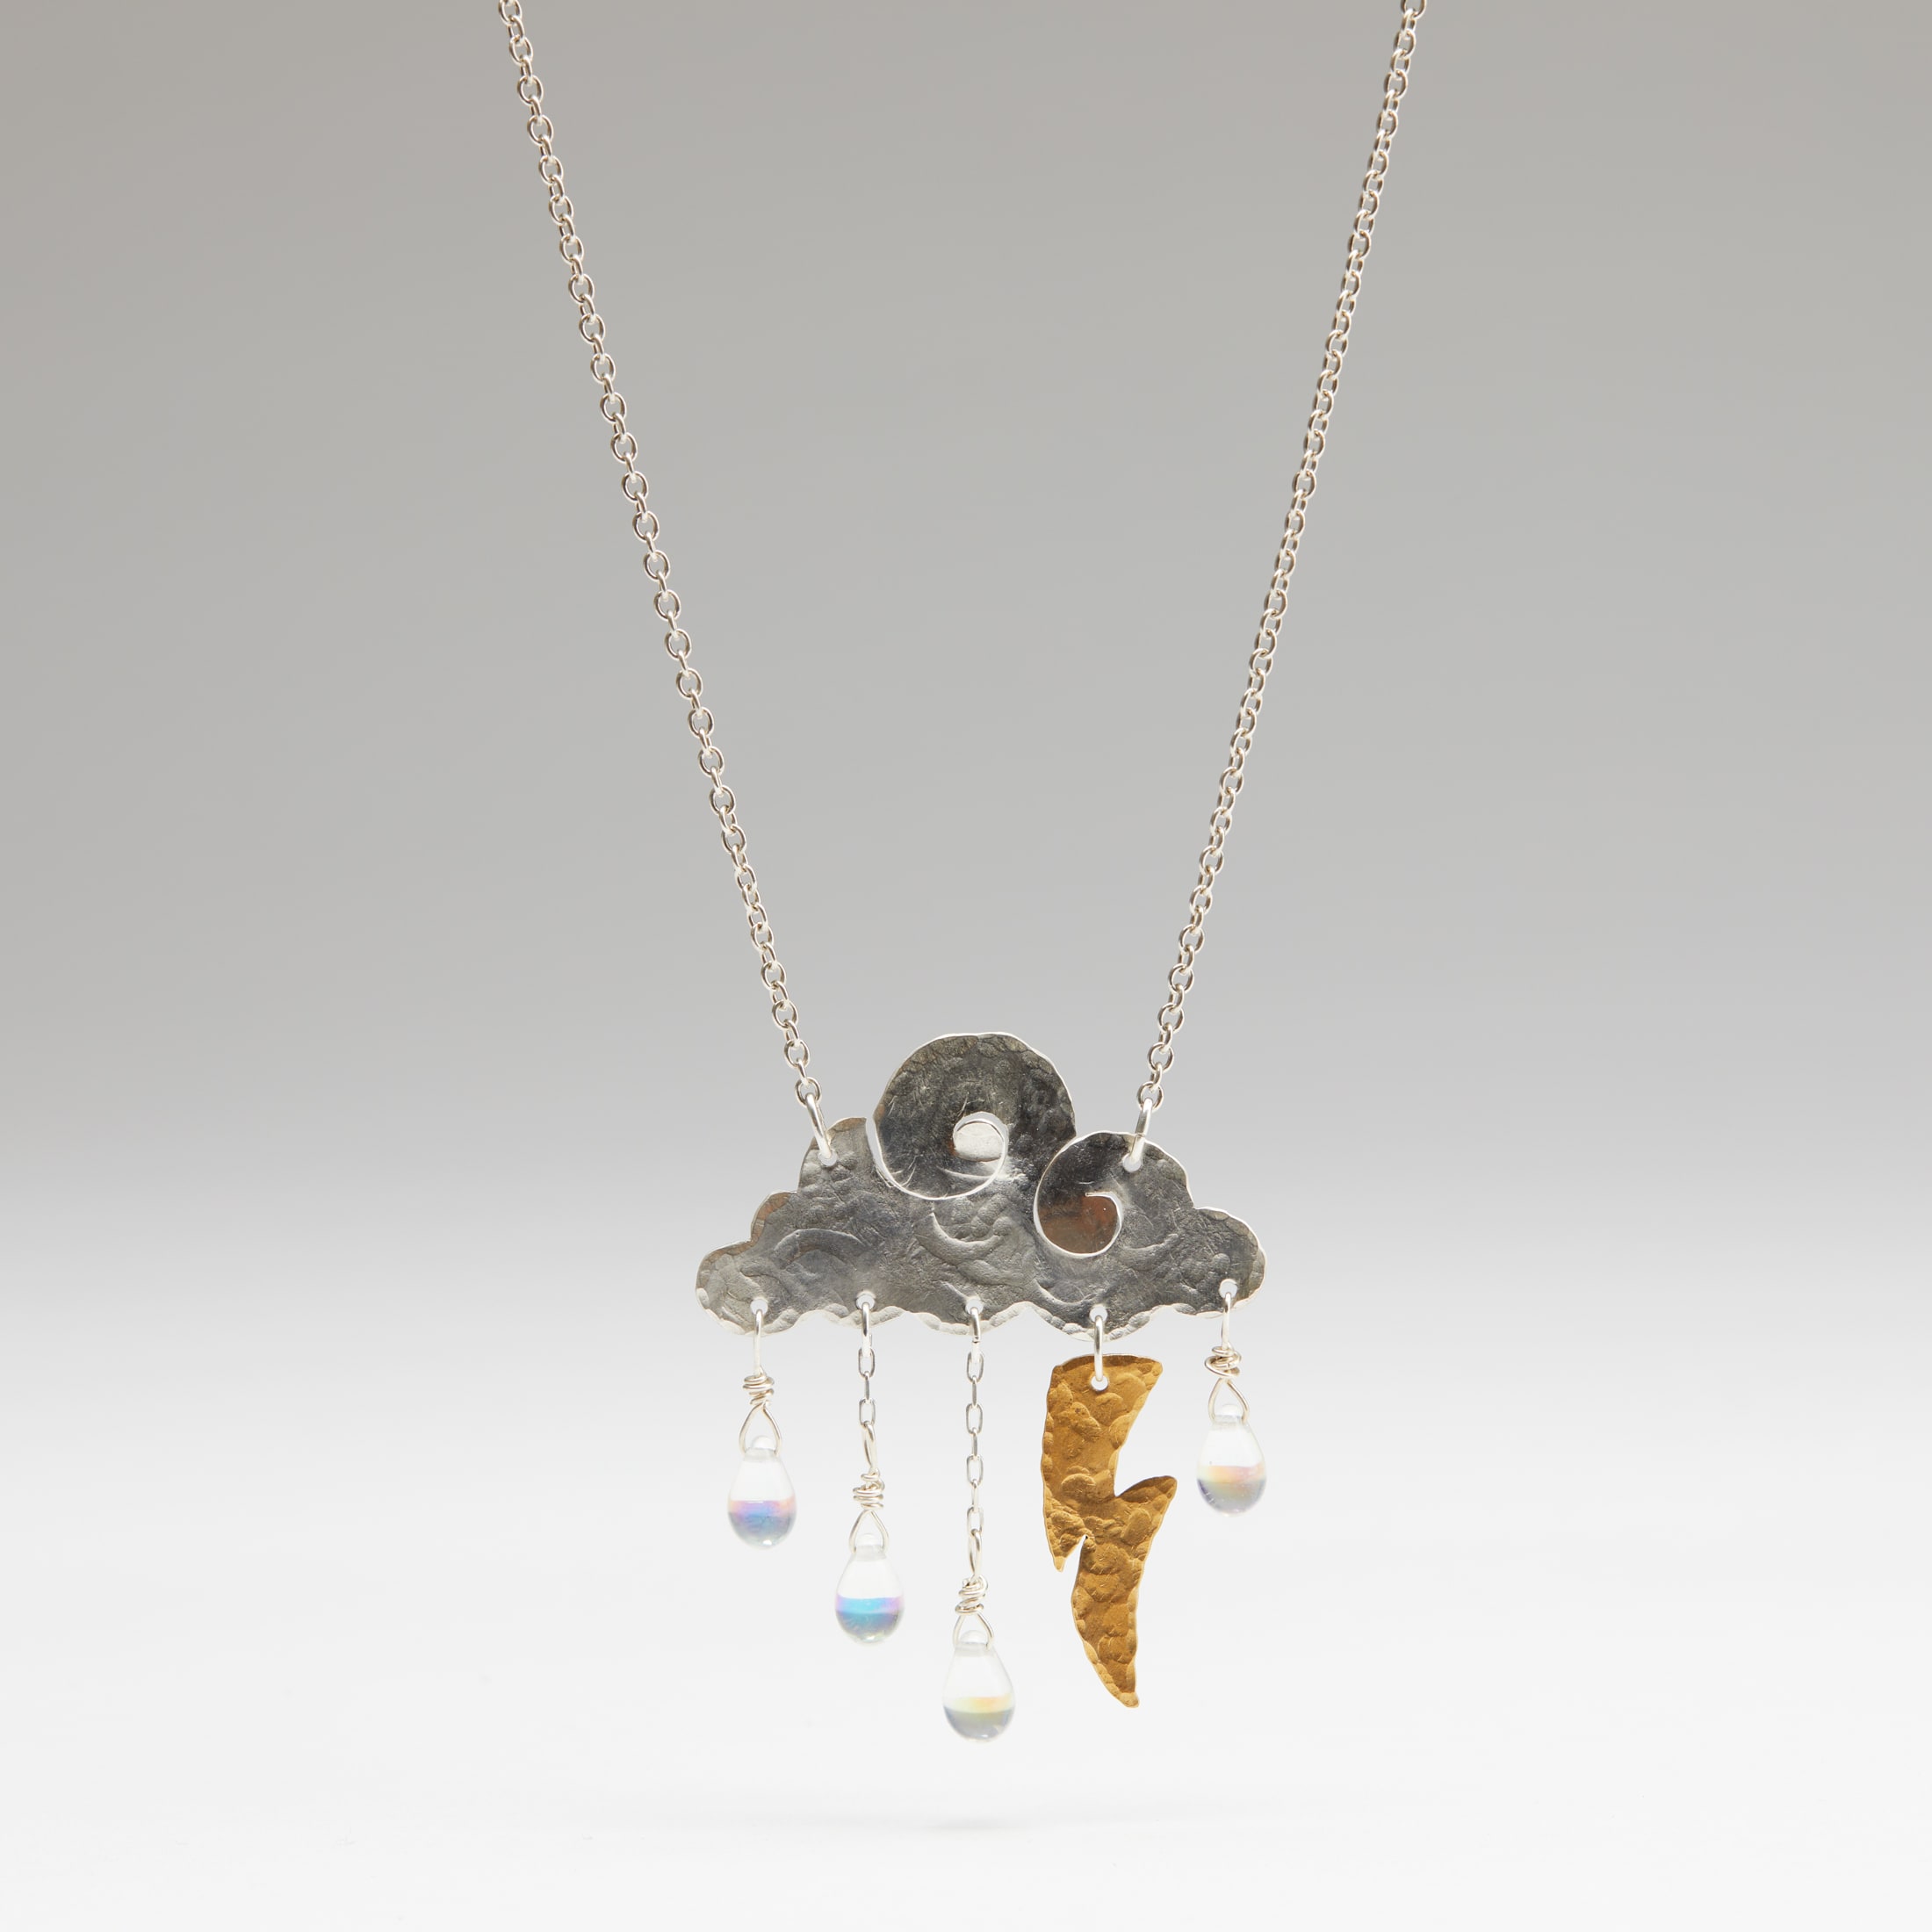 Annette Doreng-Stearns, Rain Cloud Necklace with Lightning and 4 Crystal  Drops, 2022